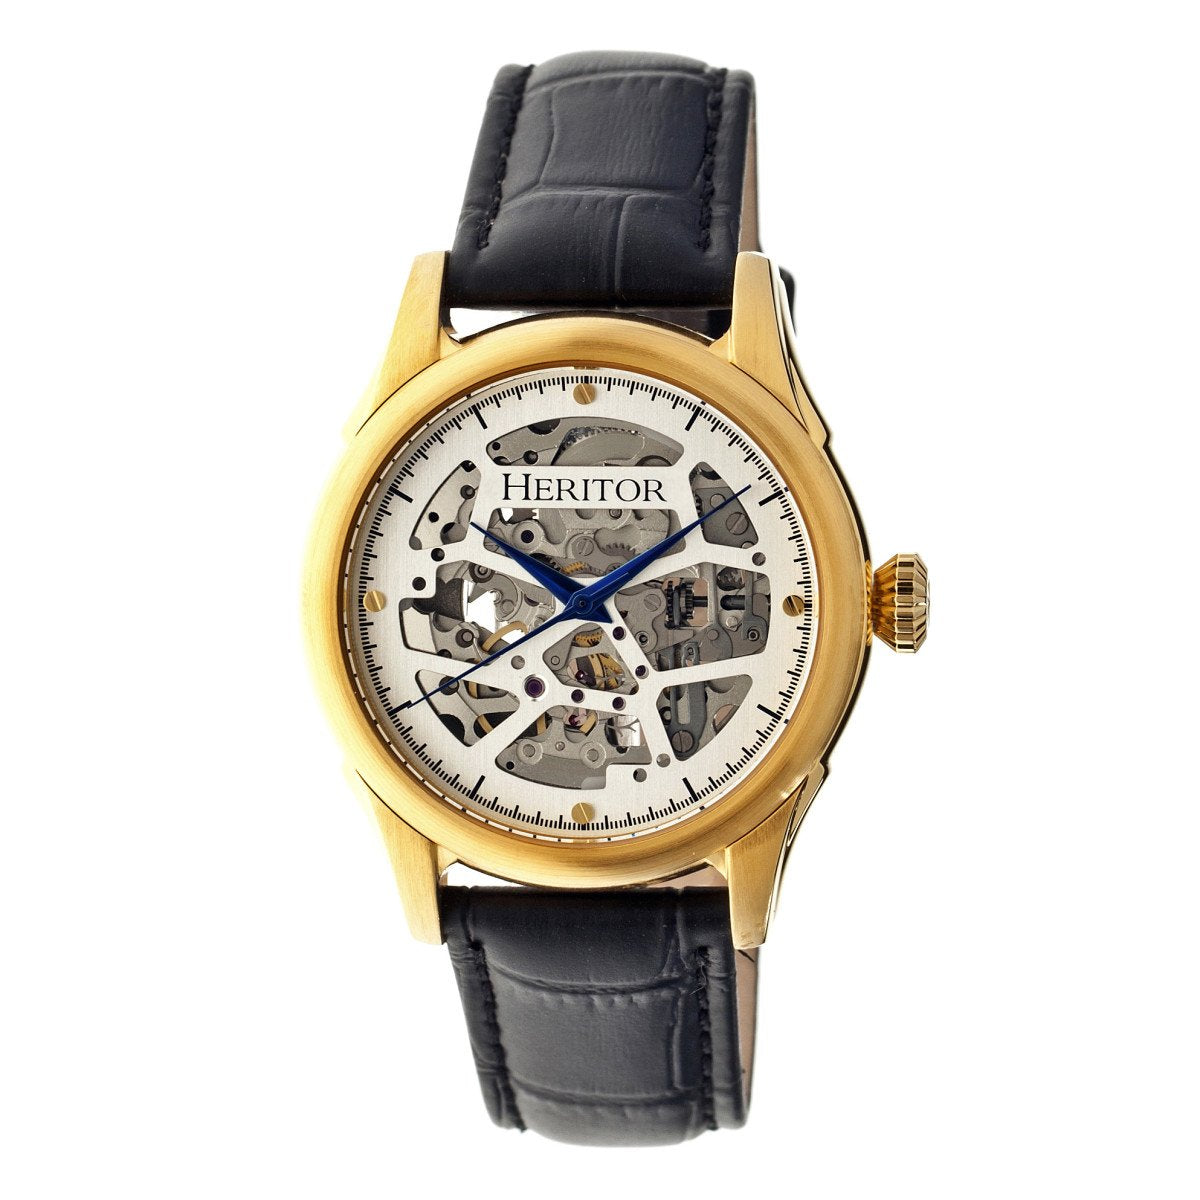 Heritor Automatic Nicollier Skeleton Leather-Band Watch - Gold/Black - HERHR1903